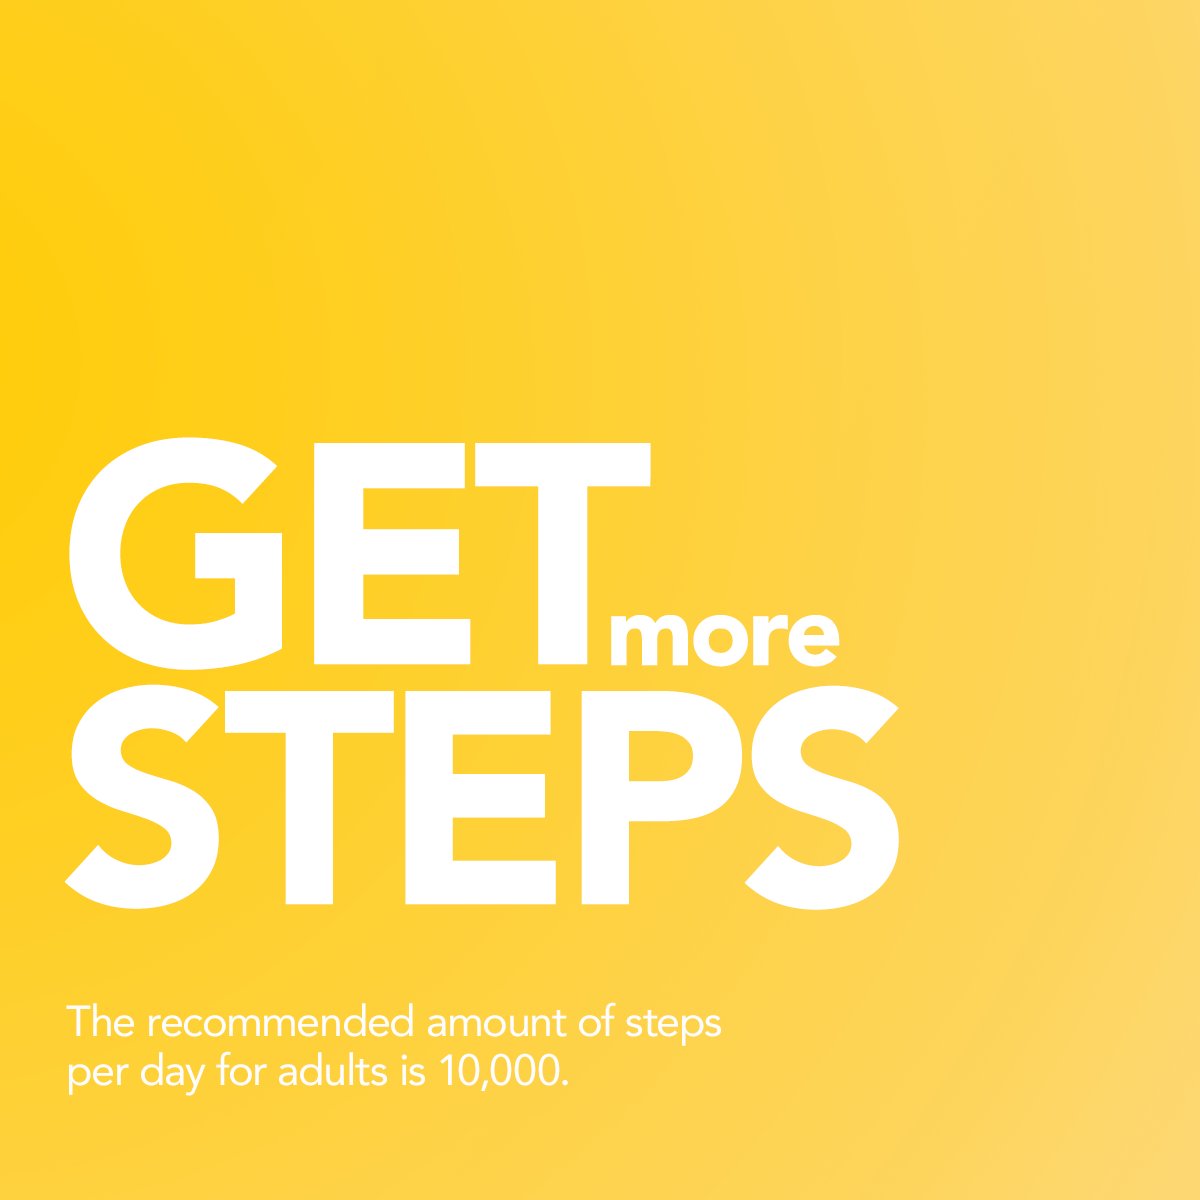 As the weather warms, start walking more! Walking is a great low-impact exercise that boosts cardiovascular health without leaving you sore and out of breath. It's easy to fit in more steps every day – choose the stairs or park at the rear of the parking lot. https://t.co/cxmaolCpna